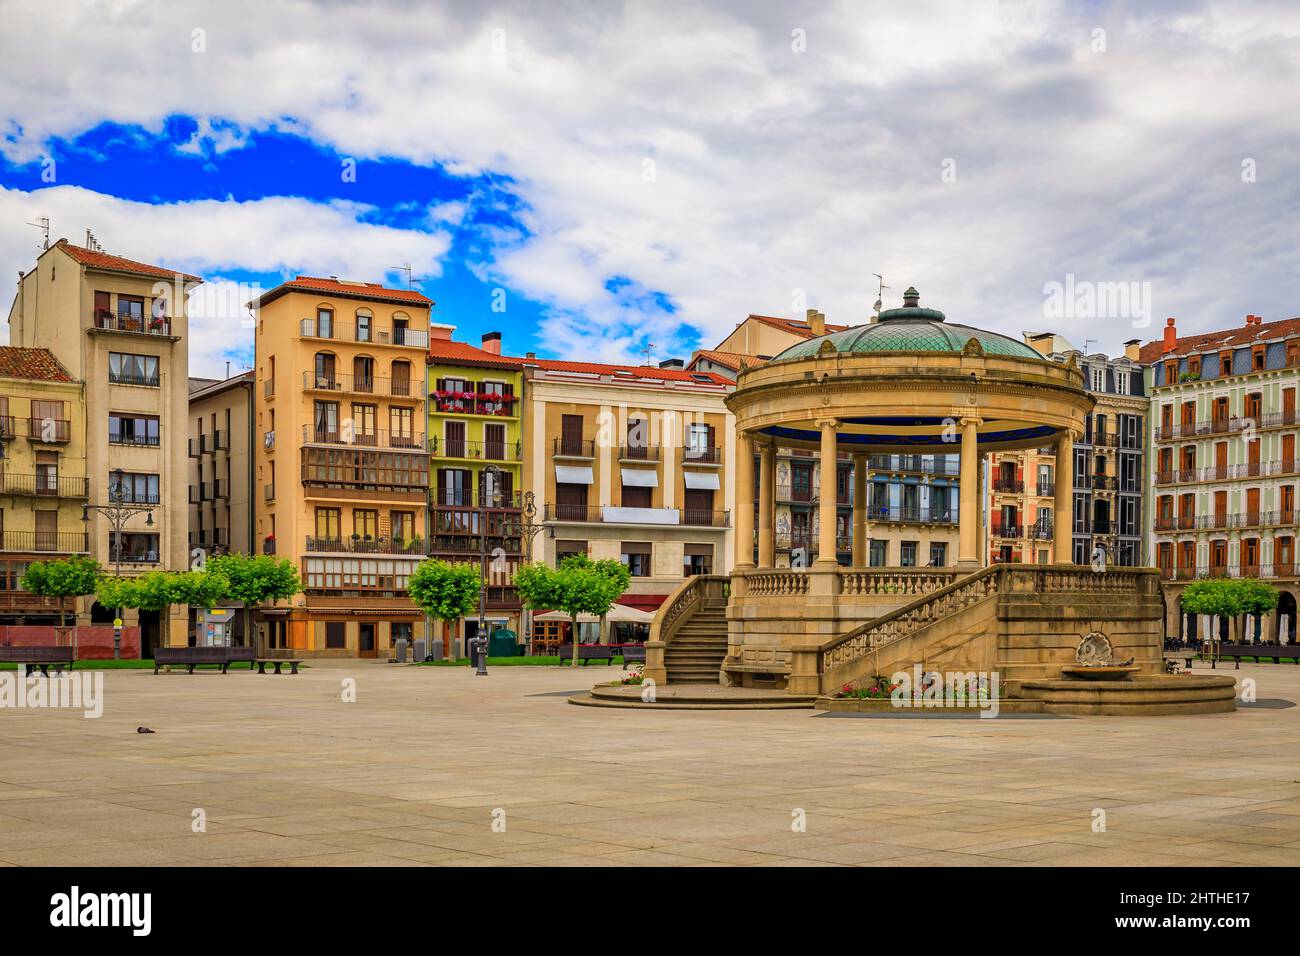 Historic Plaza del Castillo with restaurants and a central domed gazebo in Old Town, famous for running of the bulls in Pamplona, Spain Stock Photo